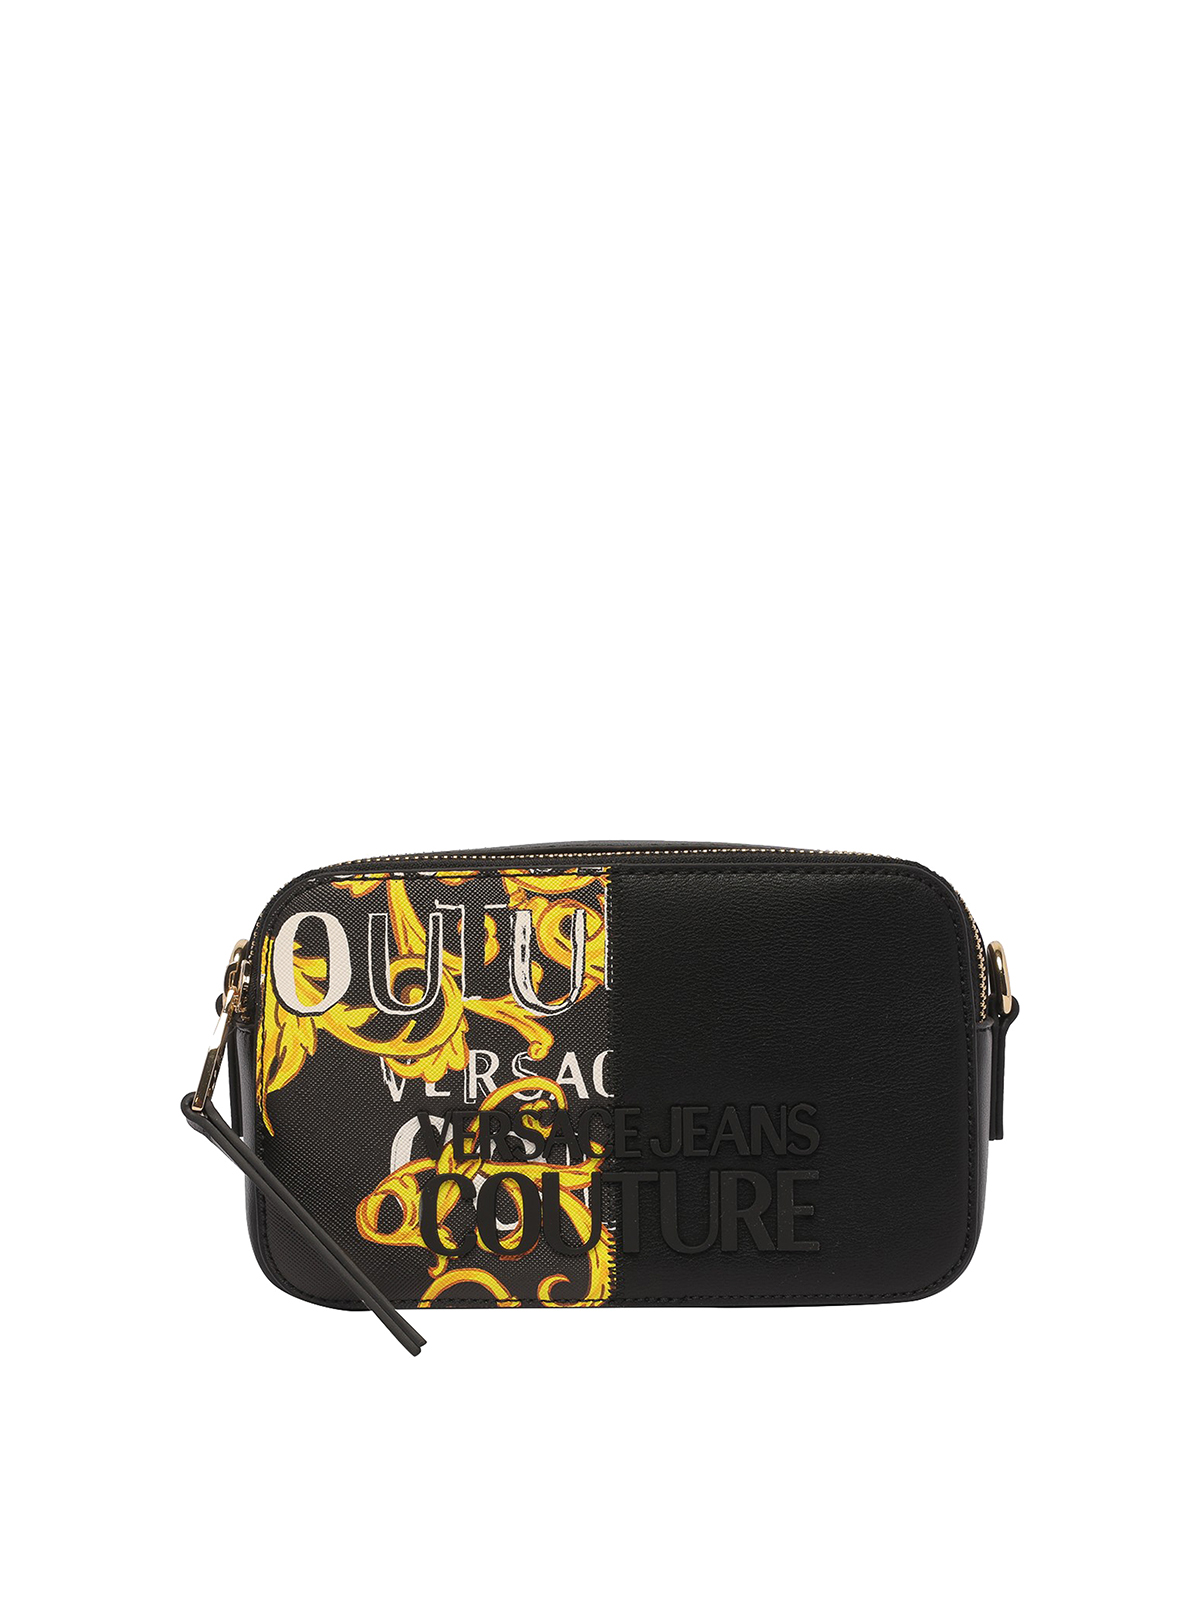 Versace Jeans Couture Bags Black, Crossbody Bag